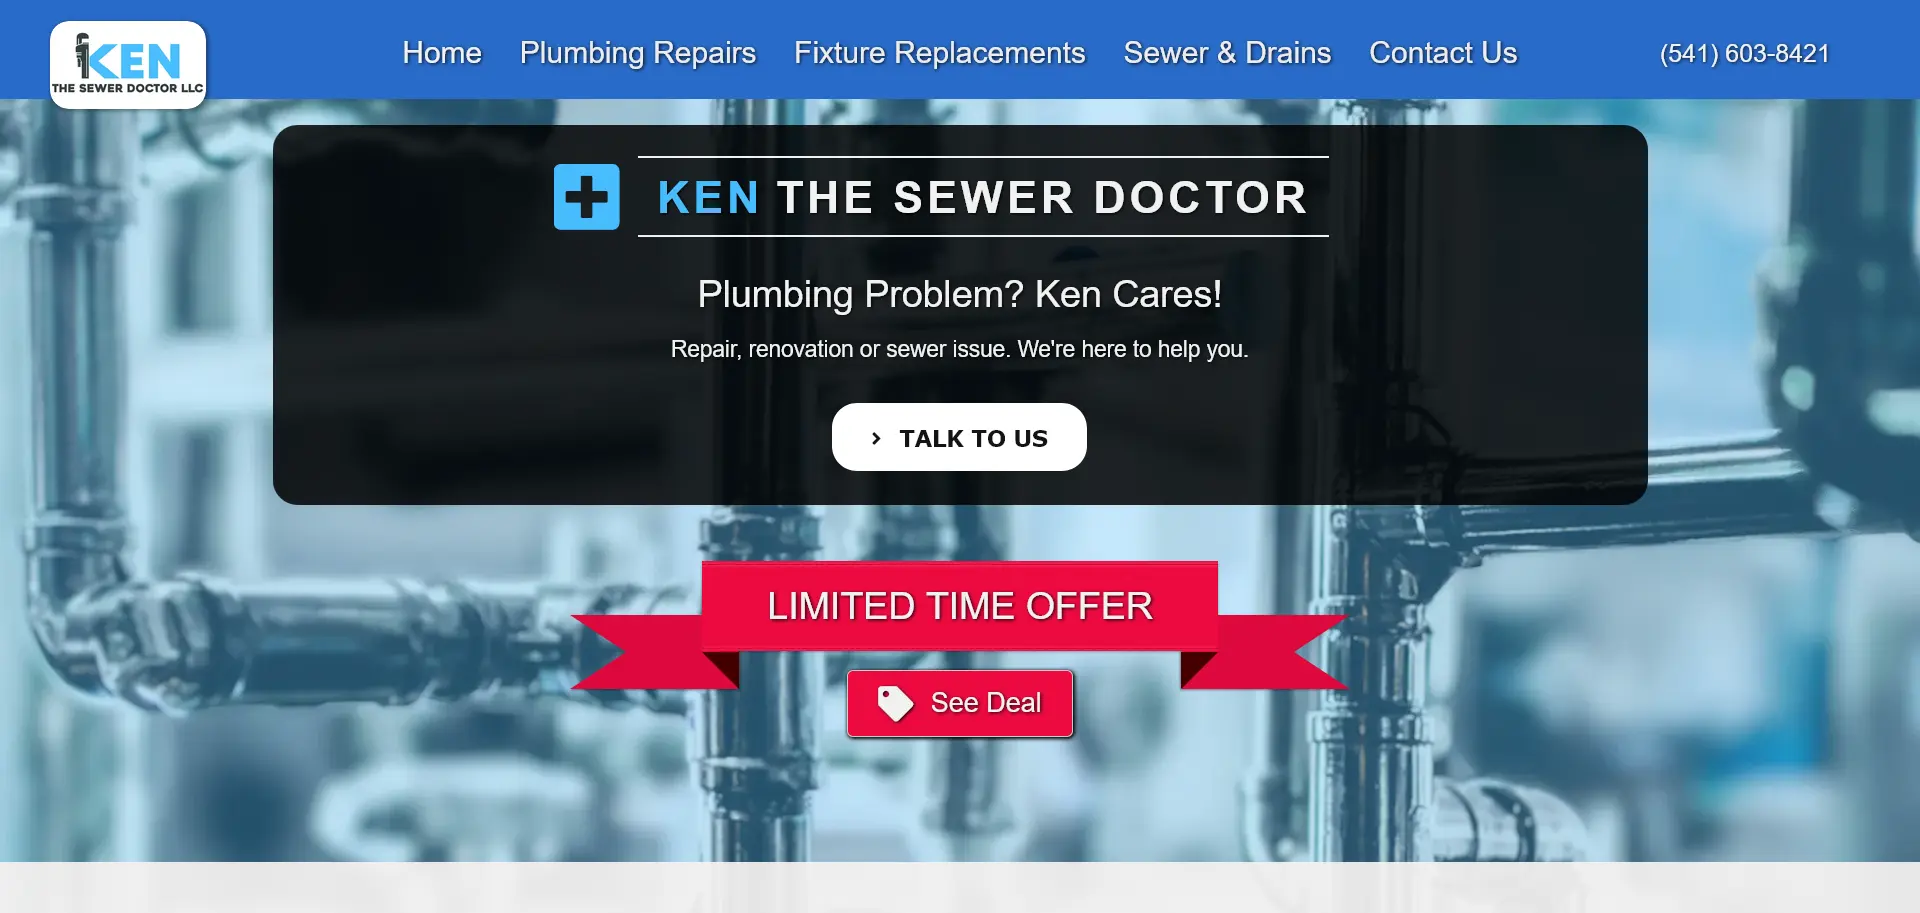 The website for Ken the Sewer Doctor.